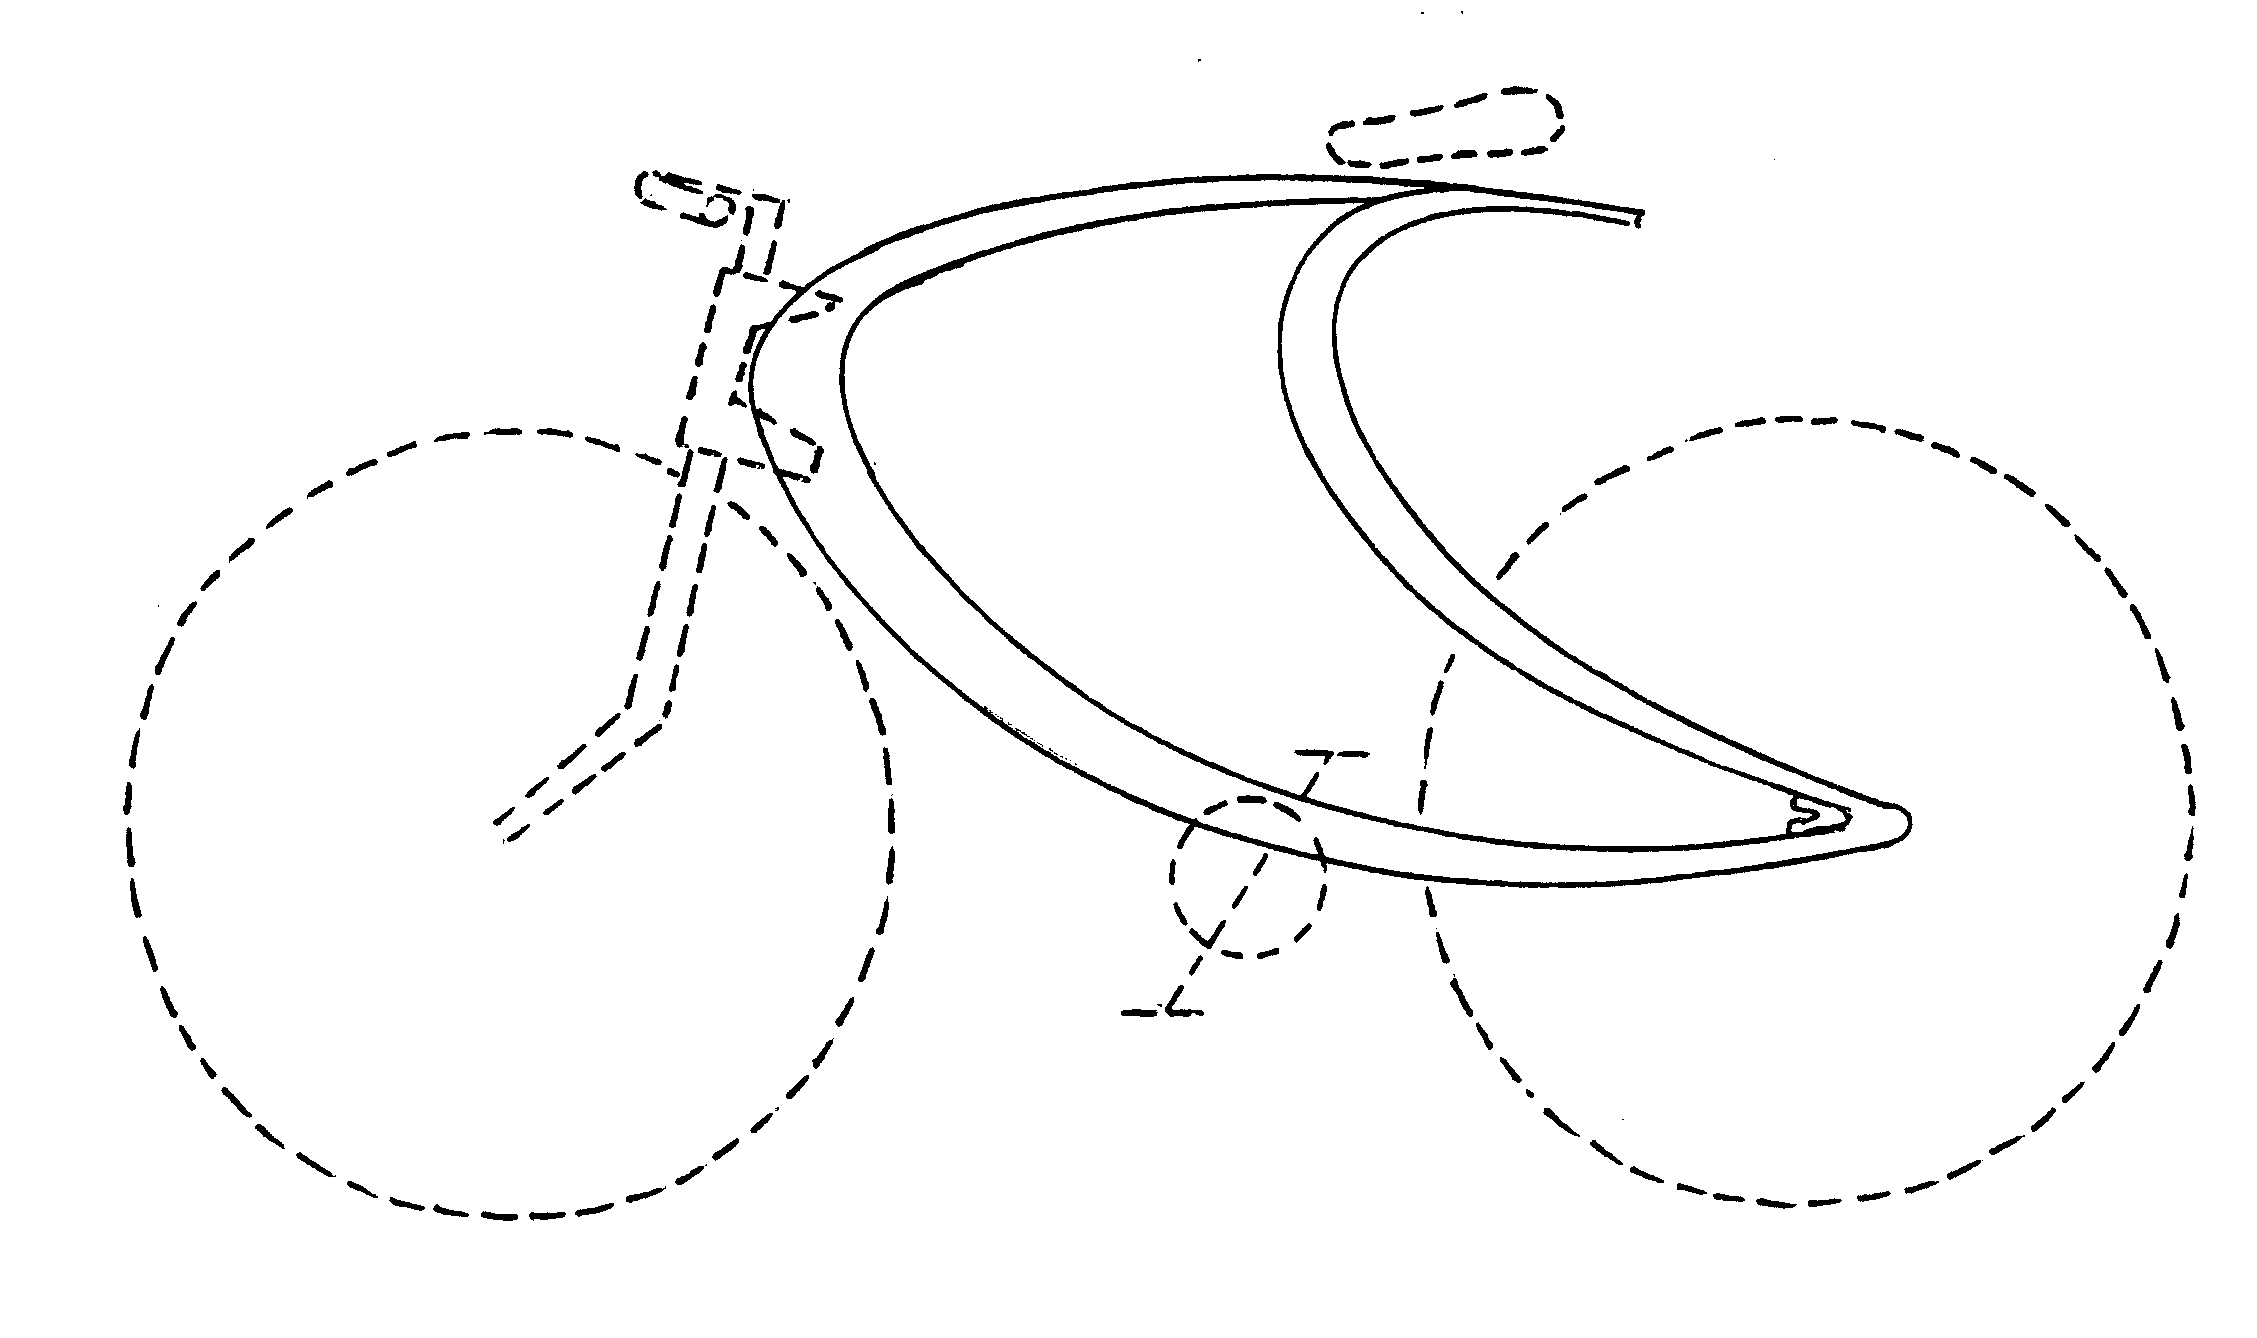 Bicycle frame composed with convoluted curves